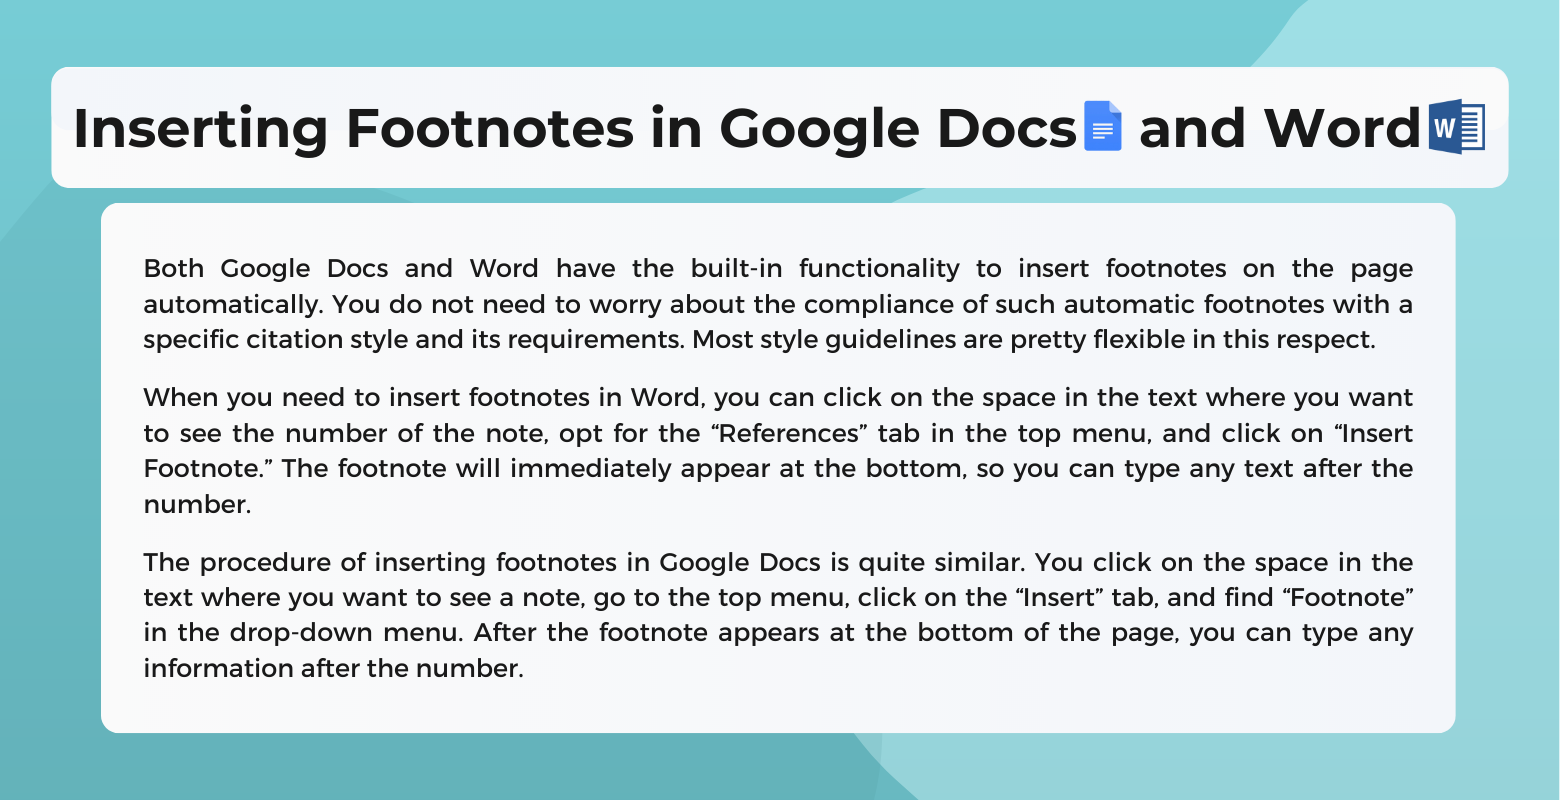 Inserting Footnotes in Google Docs and Word